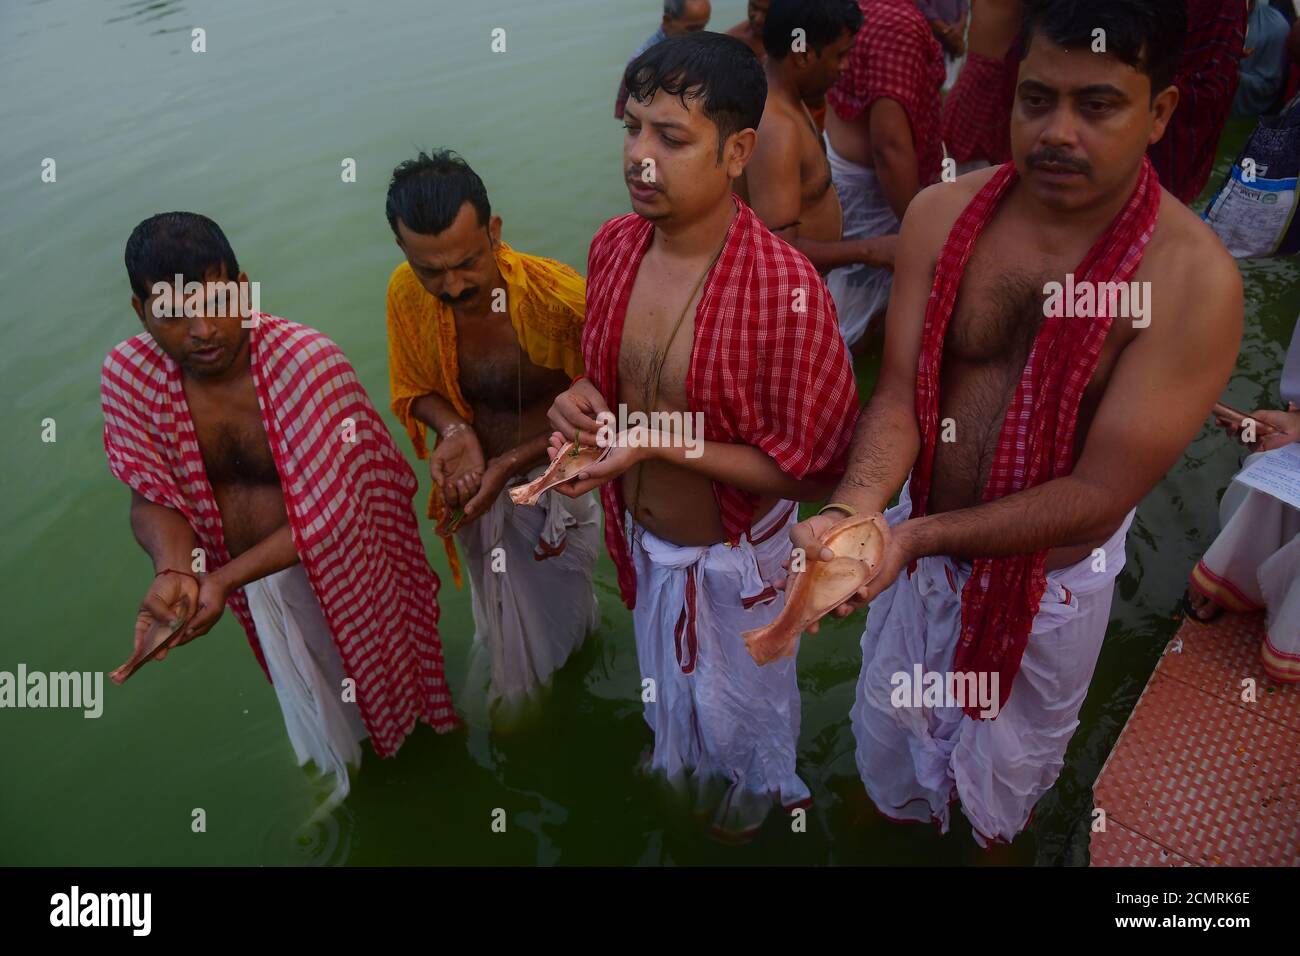 Indian Hindu devotees perform Tarpan, a ritual to pay obeisance to one's forefathers on the last day for offering prayers to ancestors called Pitri Tarpan. In Hindu mythology, this day is also called 'Mahalaya' and described as the day when the Gods created the ten armed Goddess Durga to destroy the demon king Asur who plotted to drive out the gods from their kingdom. The five-day period of worship of Durga, is attributed as the destroyer of evil. Agartala, Tripura, India. Stock Photo